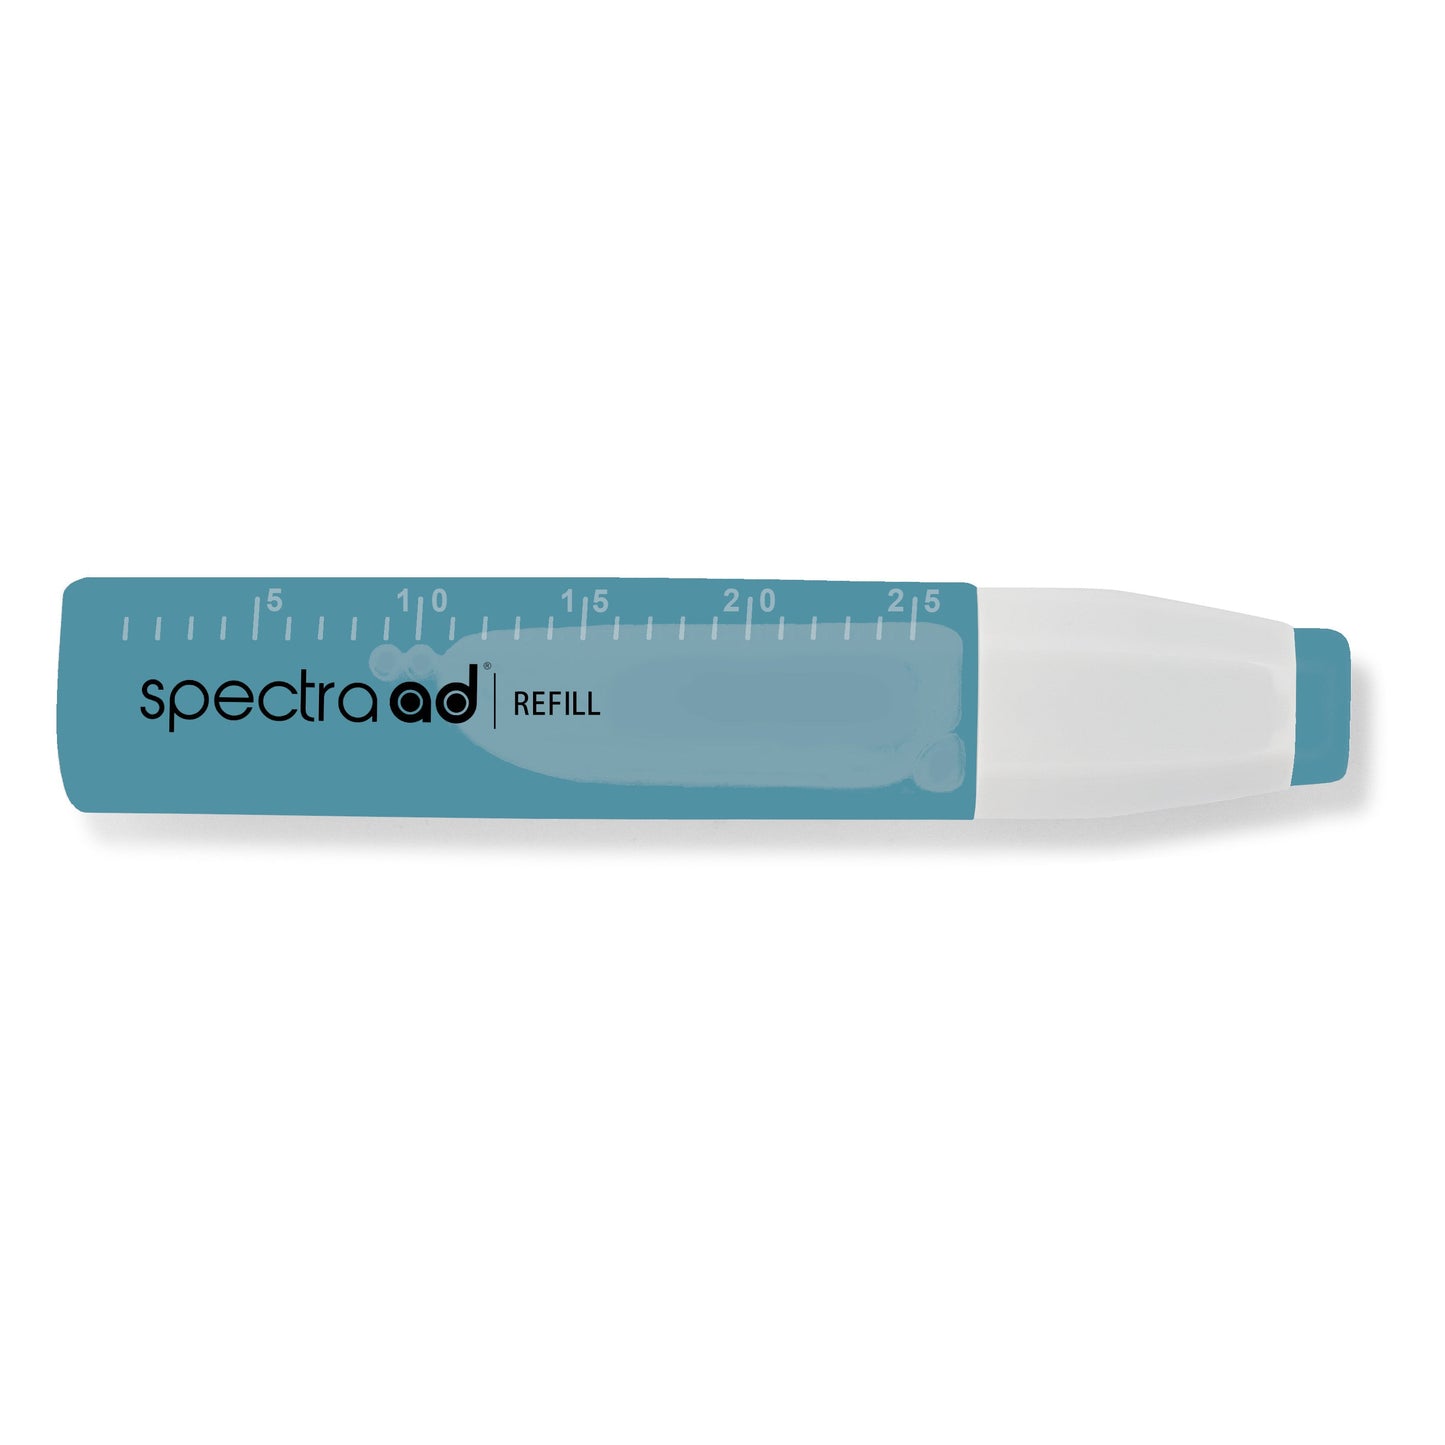 017 - Teal Green - Spectra AD Refill Bottle